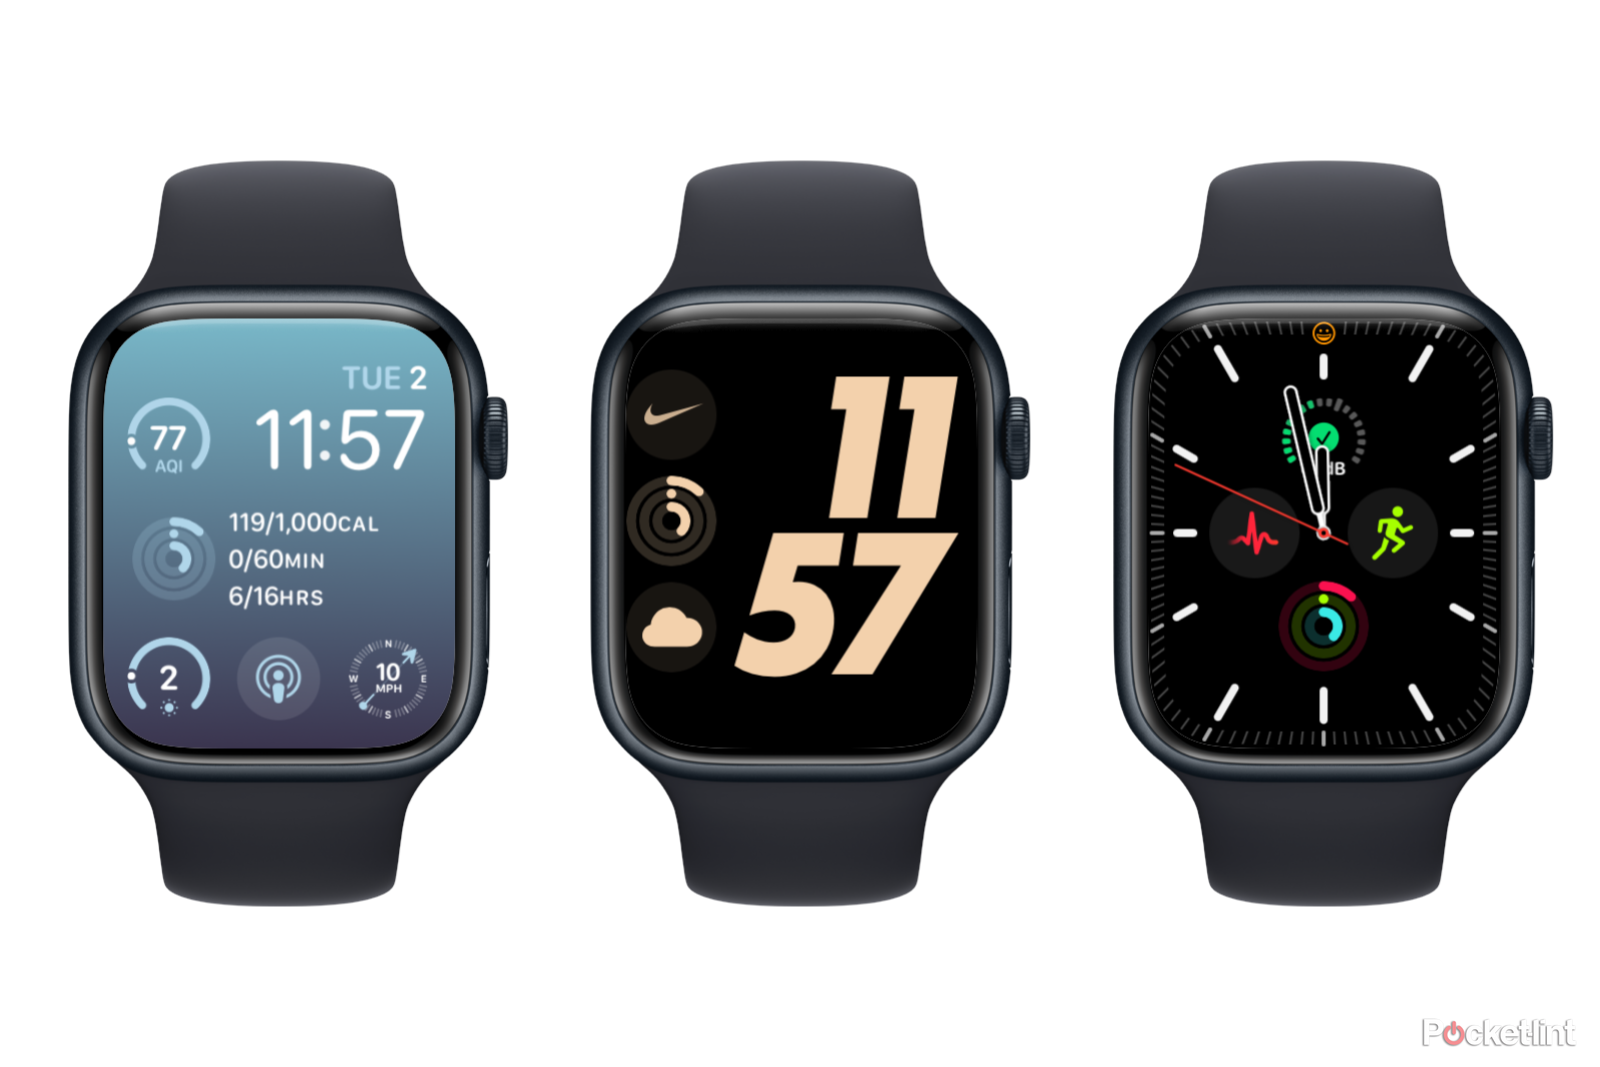 8 Apple Watch complications for your watch face